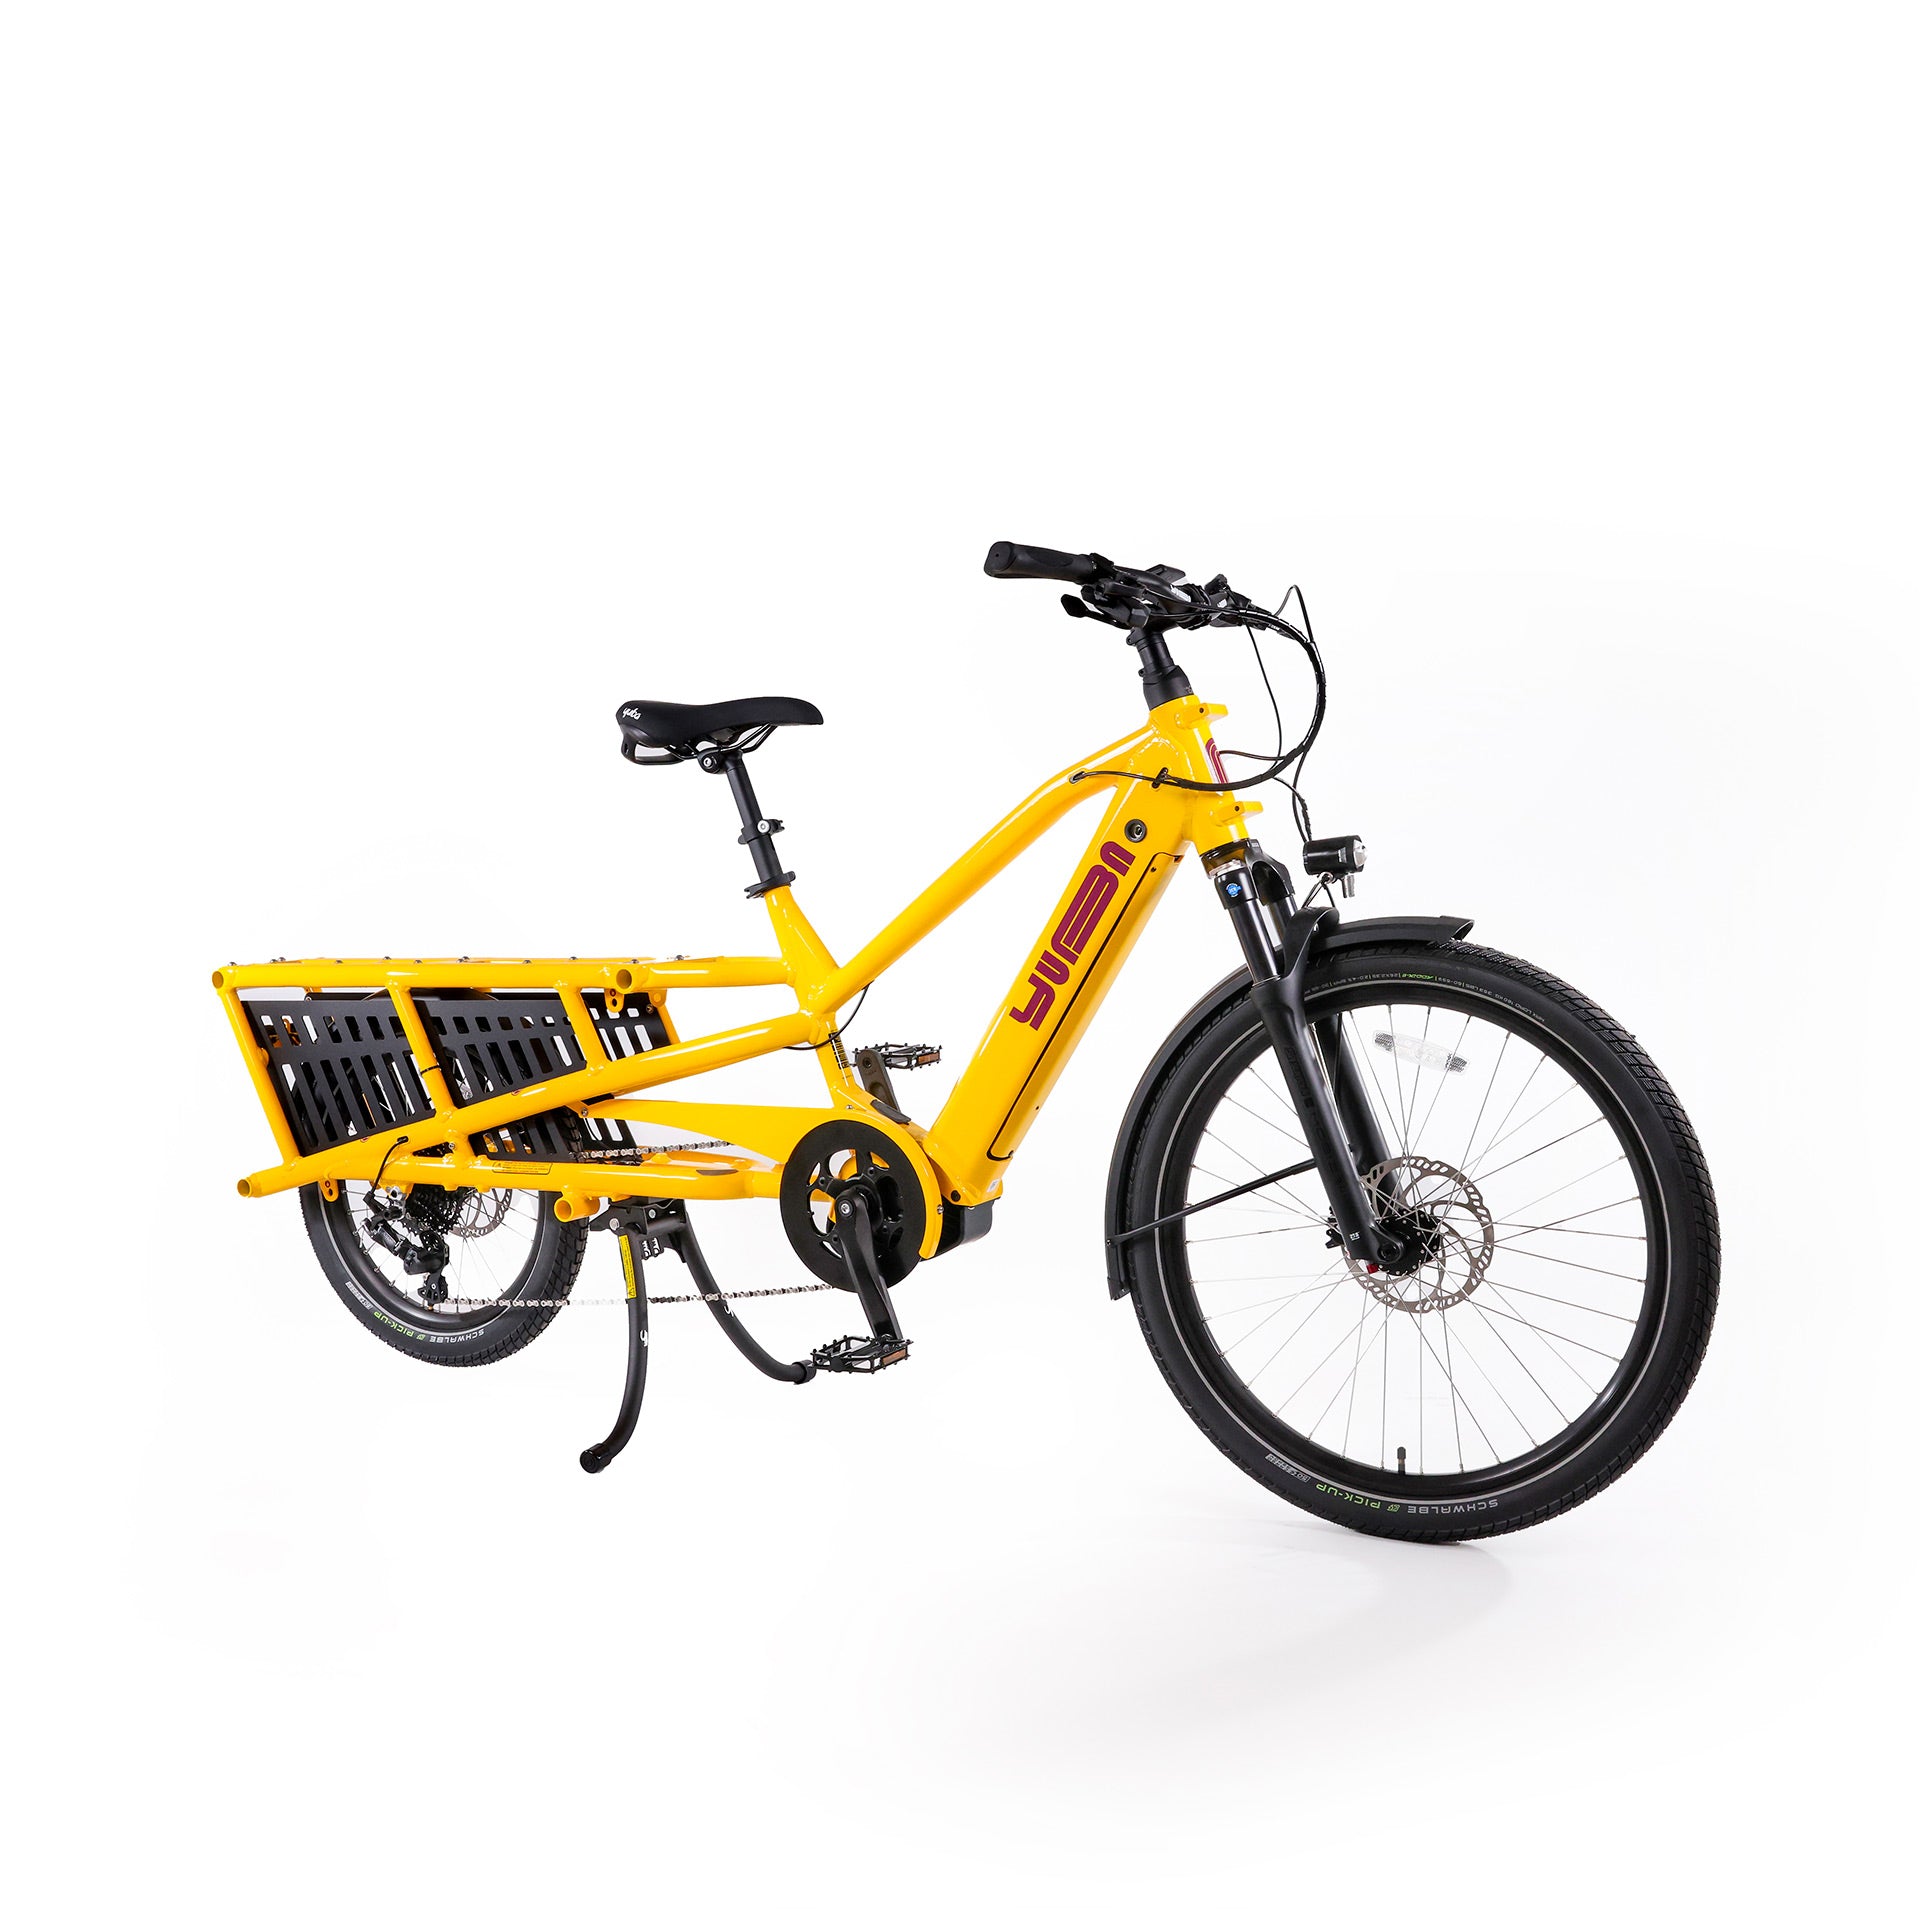 A product image of the Yuba Spicy Curry V4 electric longtail cargo bike taken from an oblique angle. The frame colour is Hello Yellow and the bike is in its basic set up, with no accessories attached. 